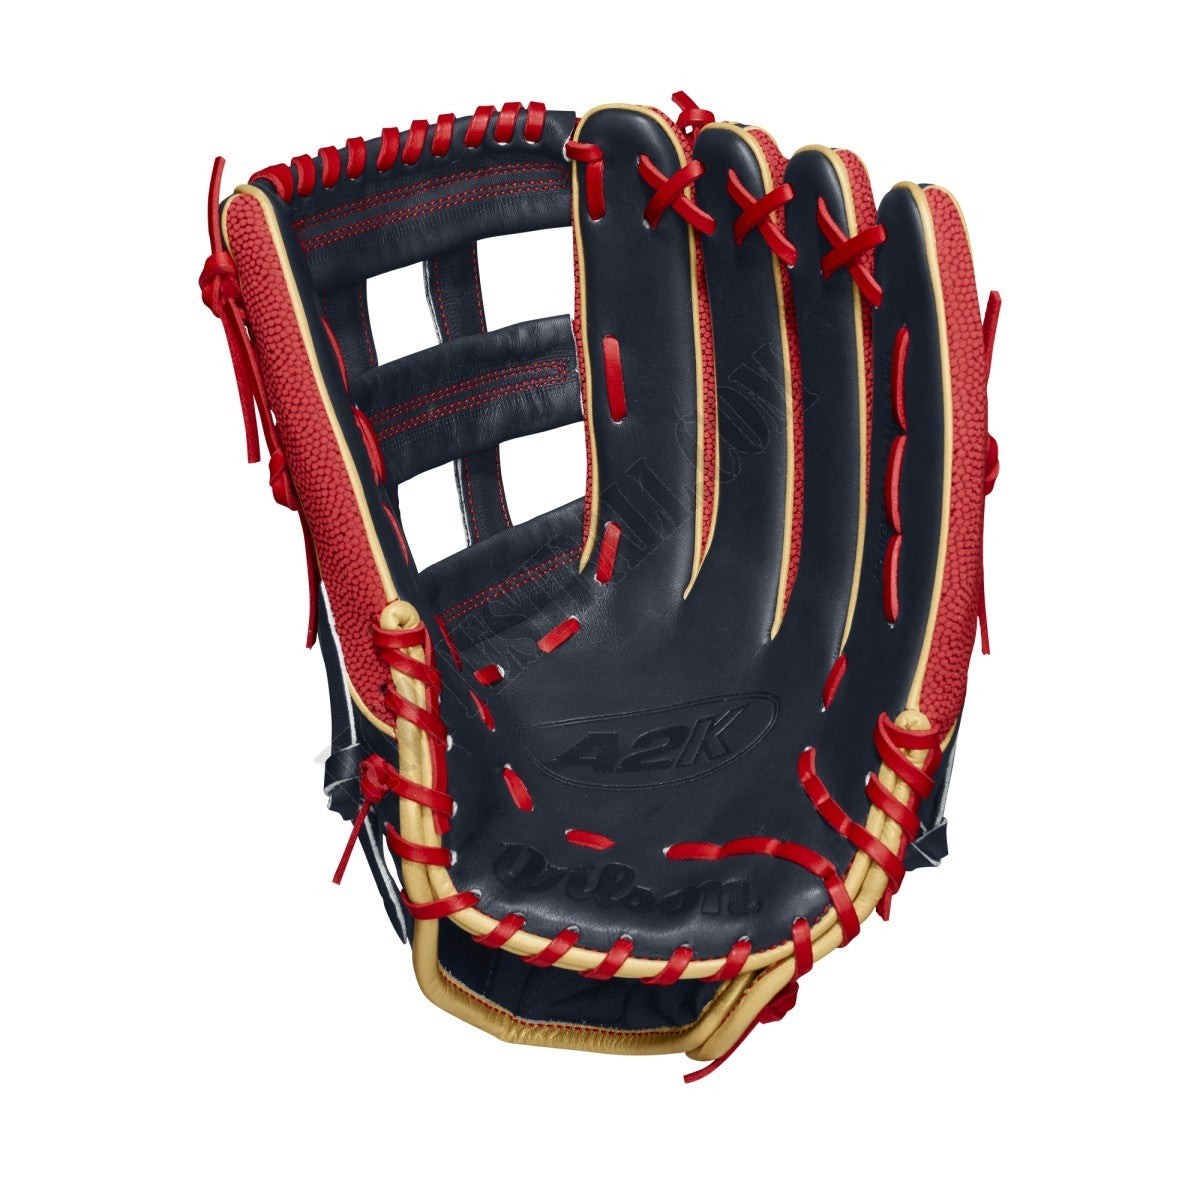 2020 A2K MB50 SuperSkin GM 12.5" Outfield Baseball Glove ● Wilson Promotions - -3